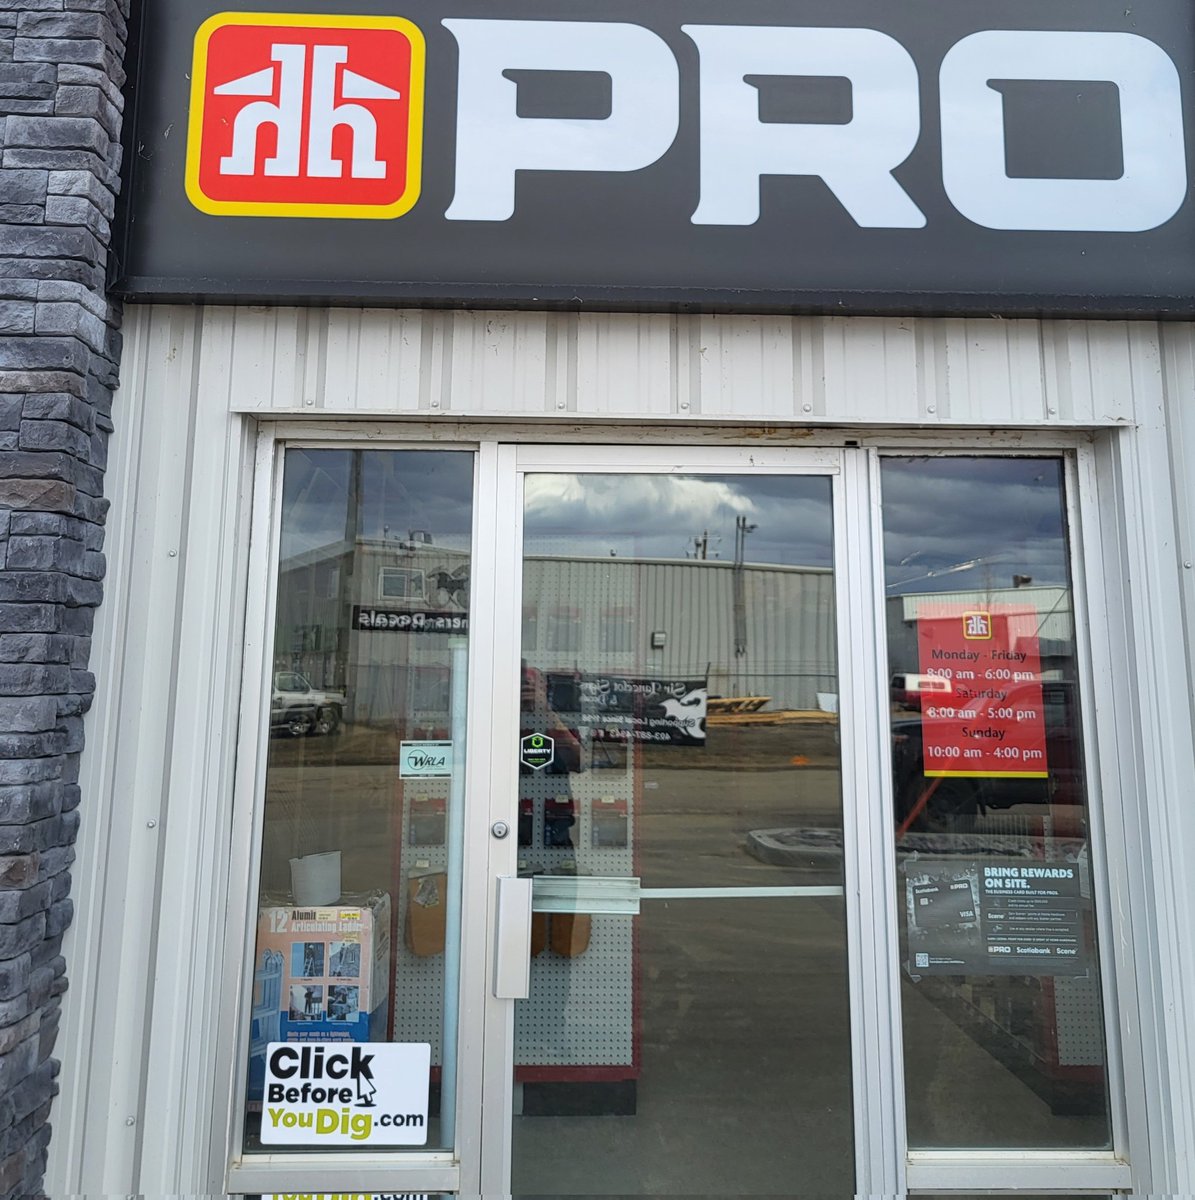 A big shout out to Sylvan Lake Home Hardware for promoting the vital message of #ClickBeforeYouDIg, #DigSafe, #UtilitySafetyPartners, #WheresTheLine